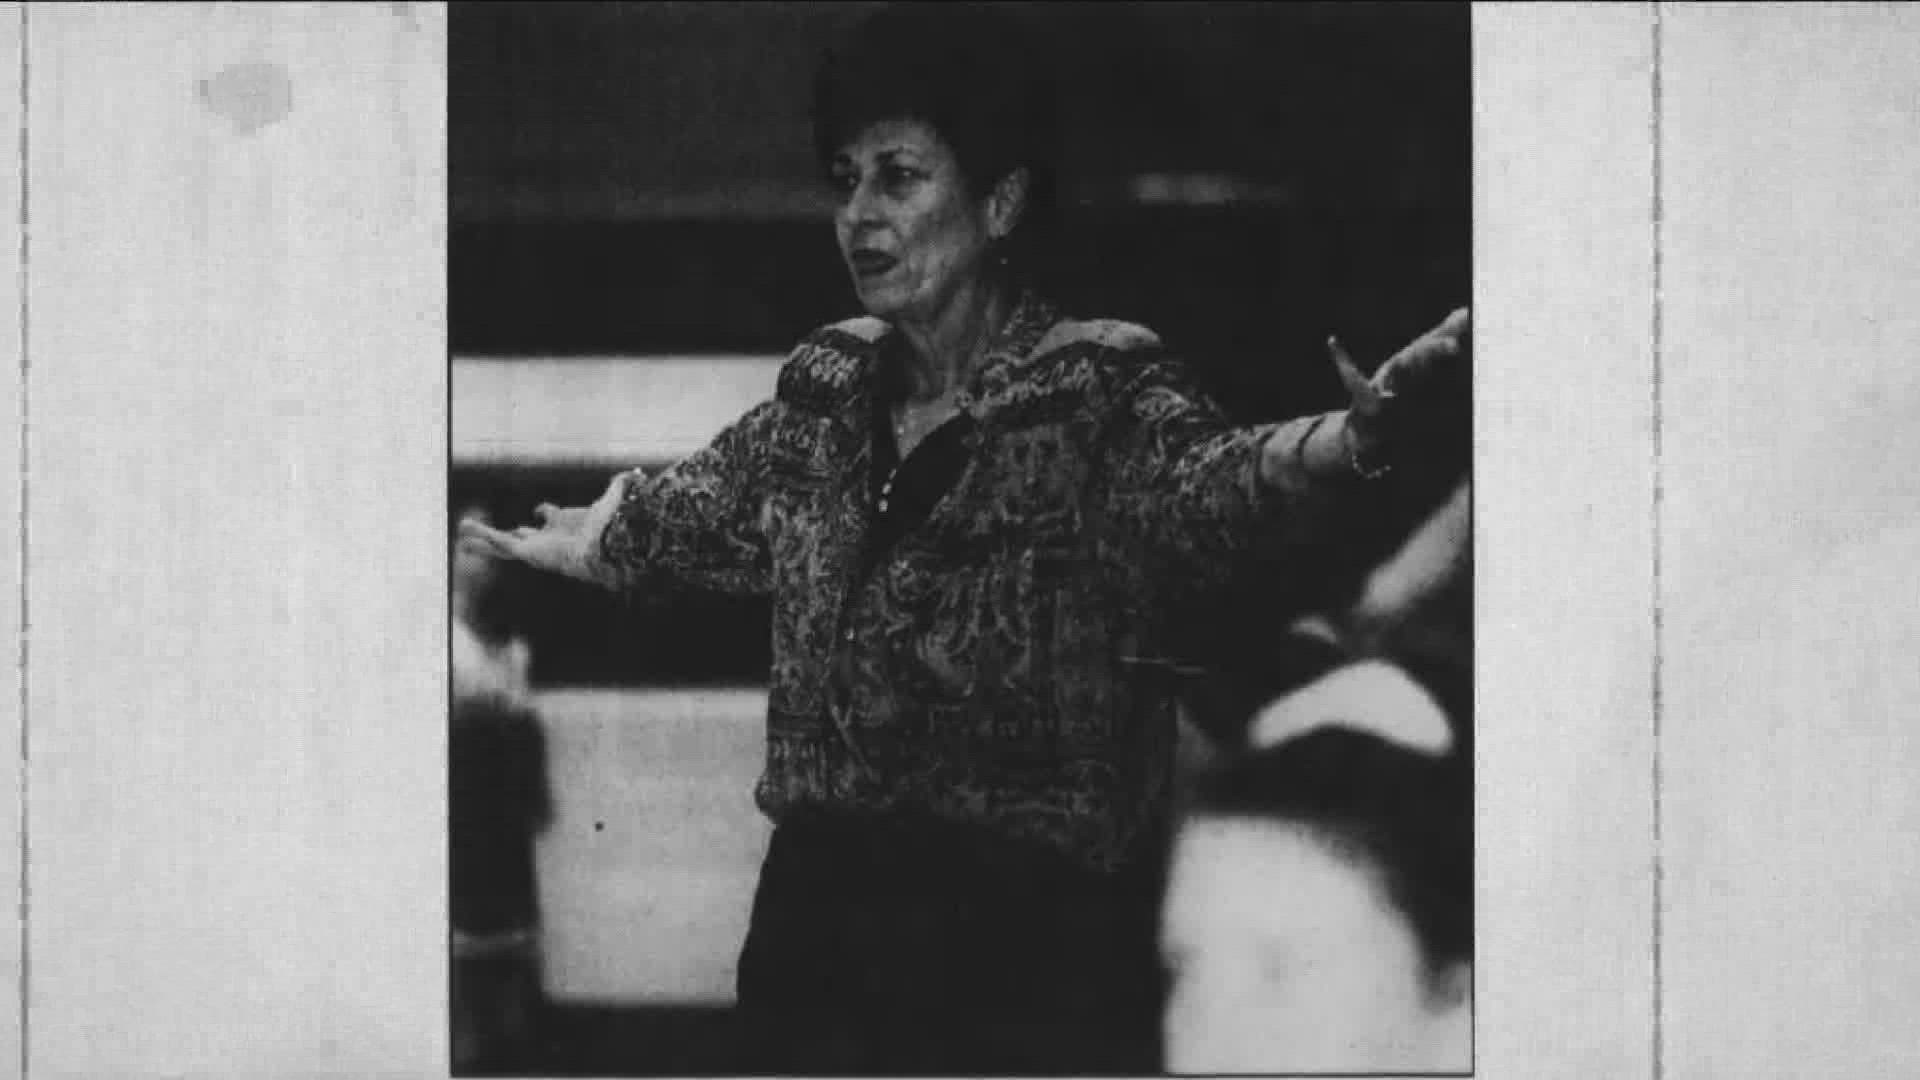 Evelyn Blalock built the Kilgore College women's basketball program from scratch, eventually leading them to three national championships.